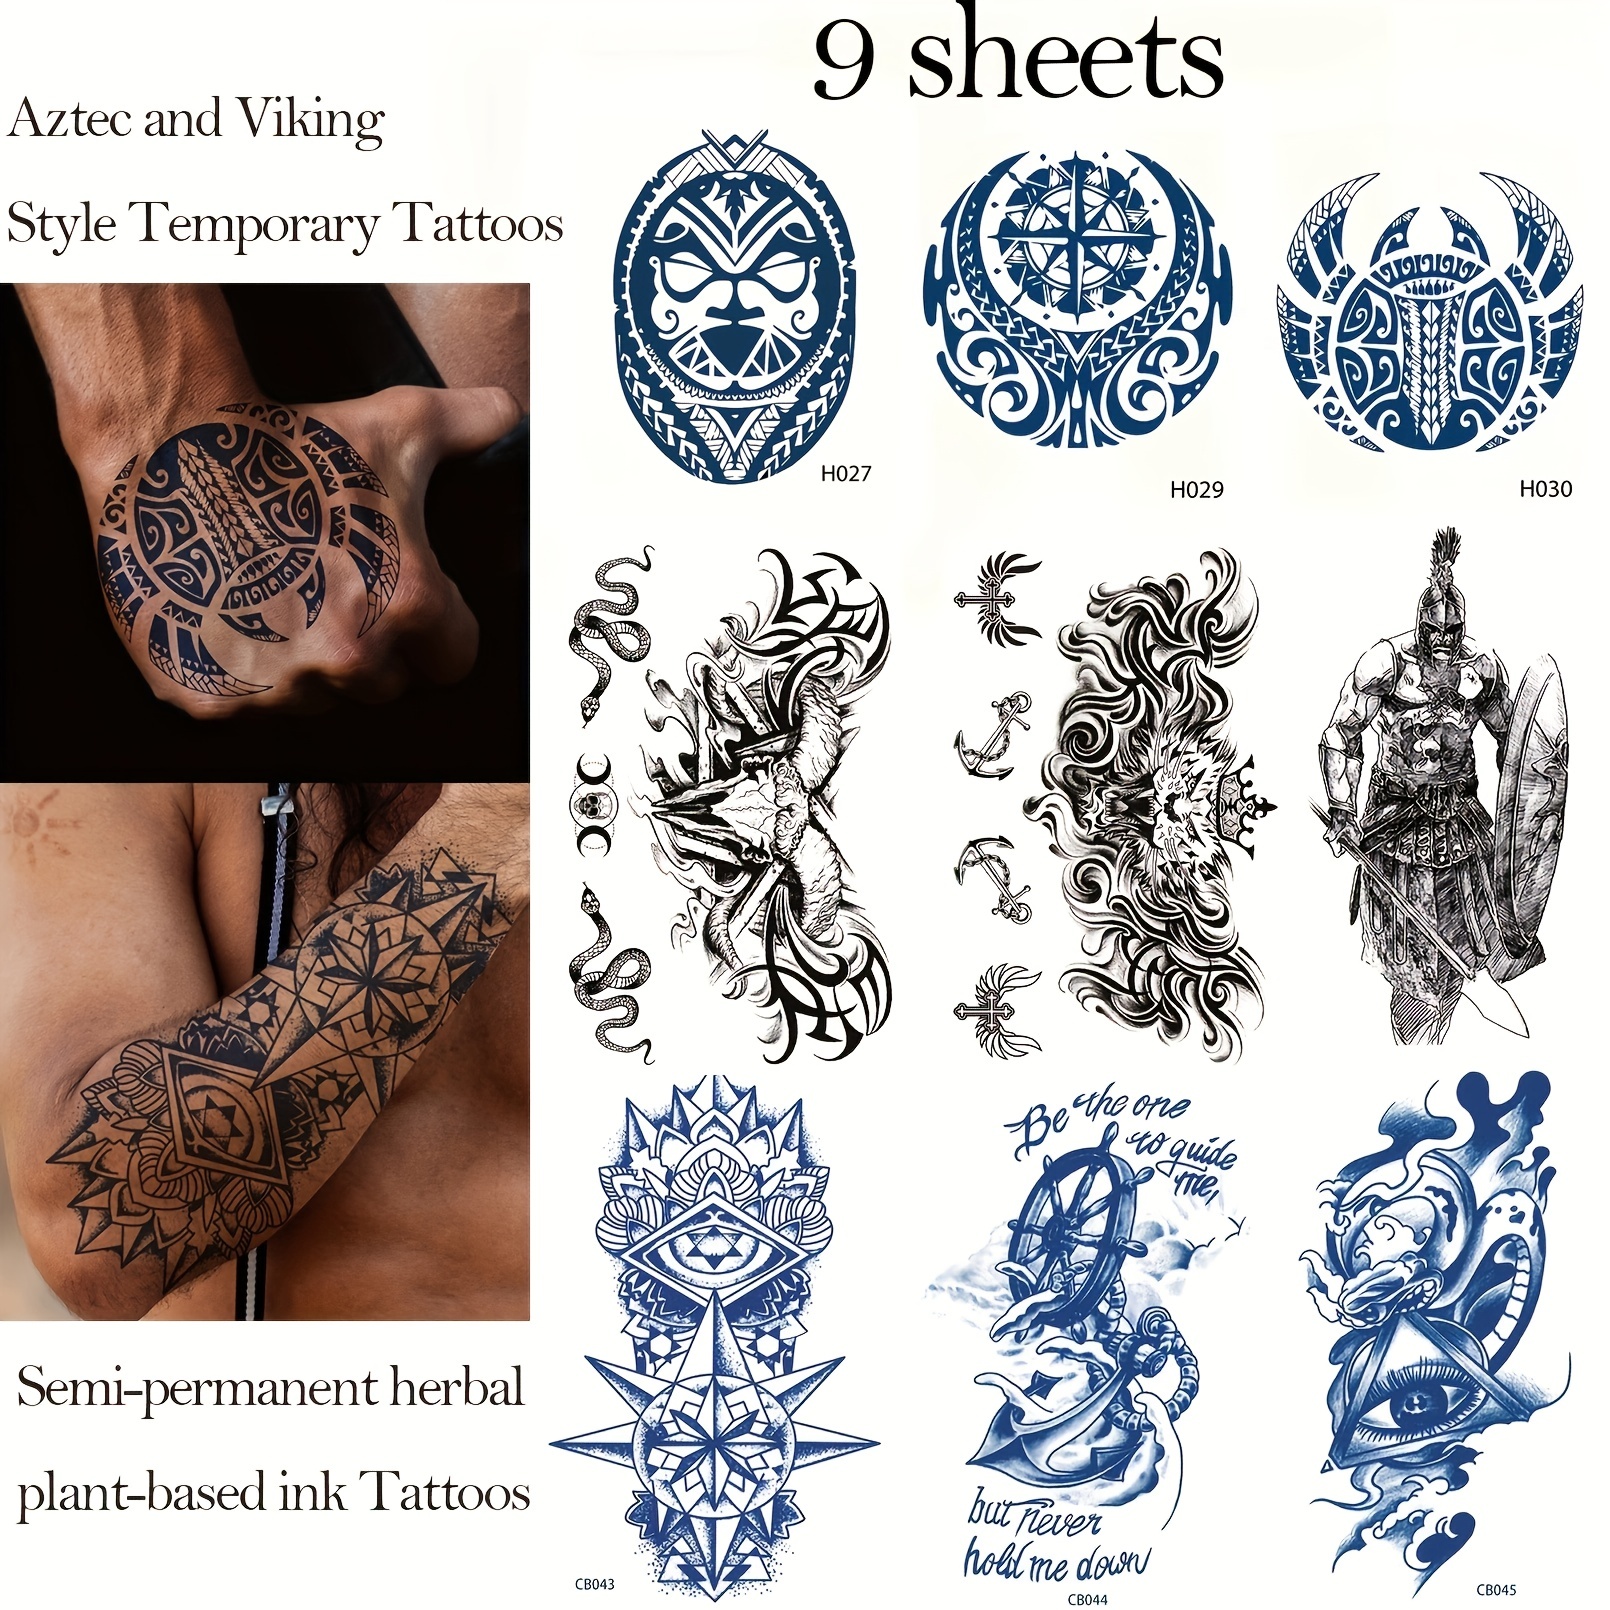 Spartan Warrior Temporary Tattoos Sleeve For Men Women Realistic Fake  Soldier Forest Demon Tattoo Sticker Full Arm Large Tatoos - Temporary  Tattoos - AliExpress